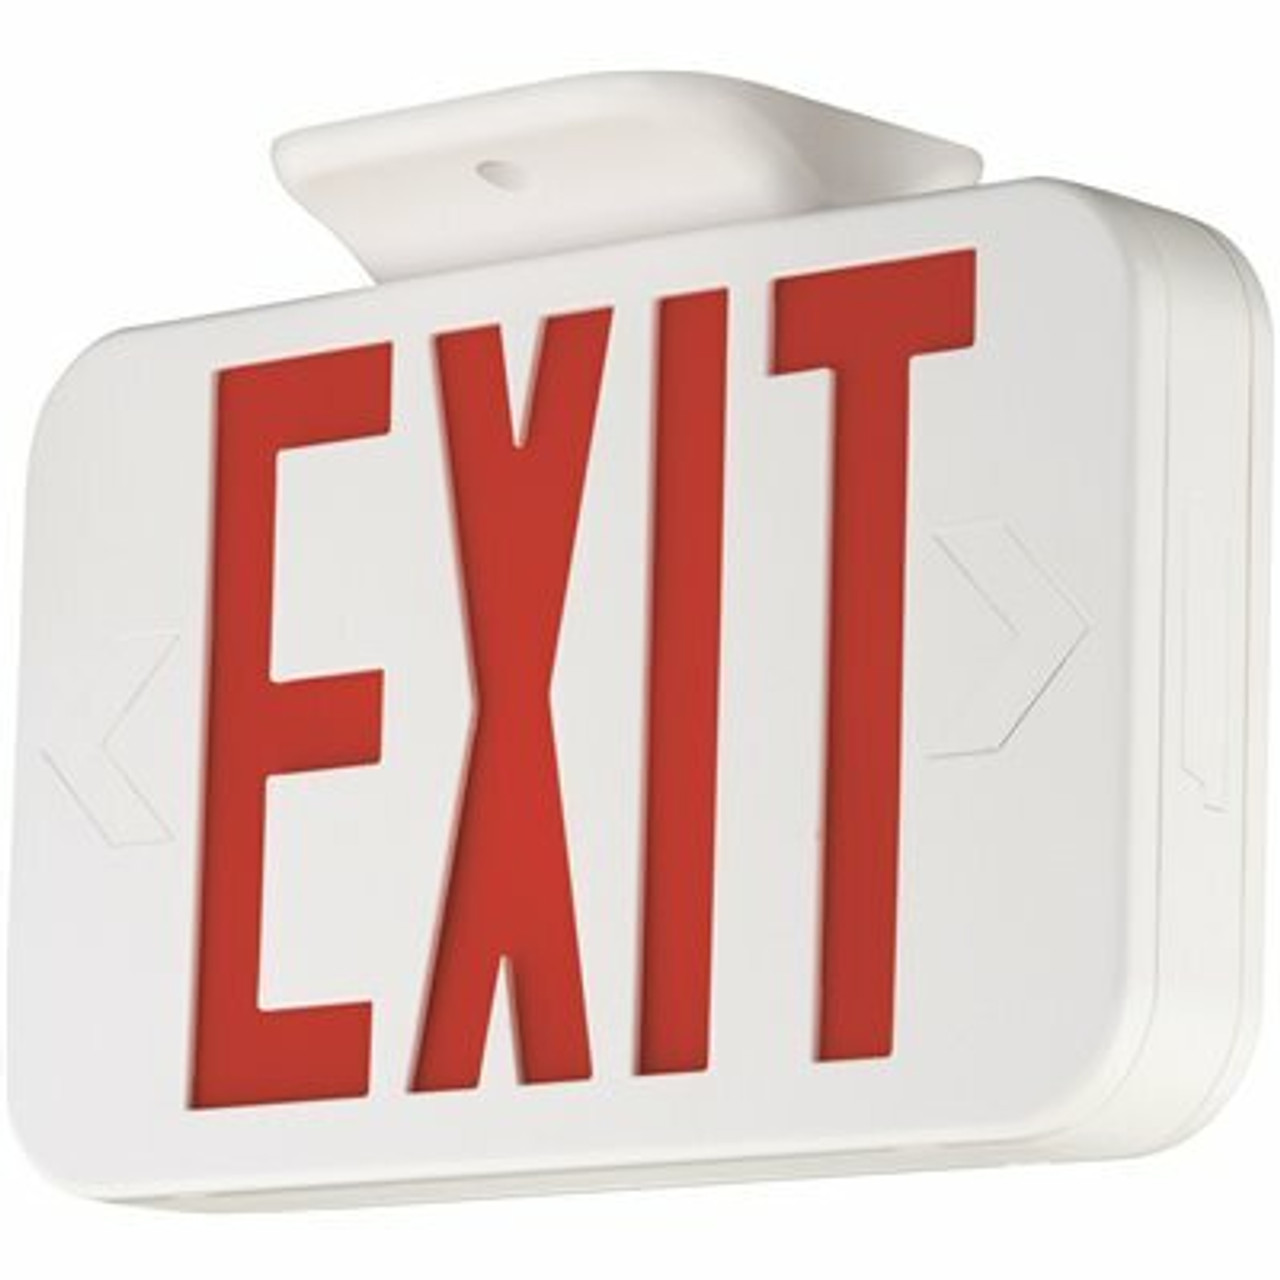 Hubbell Lighting Compass Ce Series 1.8-Watt White And Red Integrated Led Exit Sign With Nicad Battery